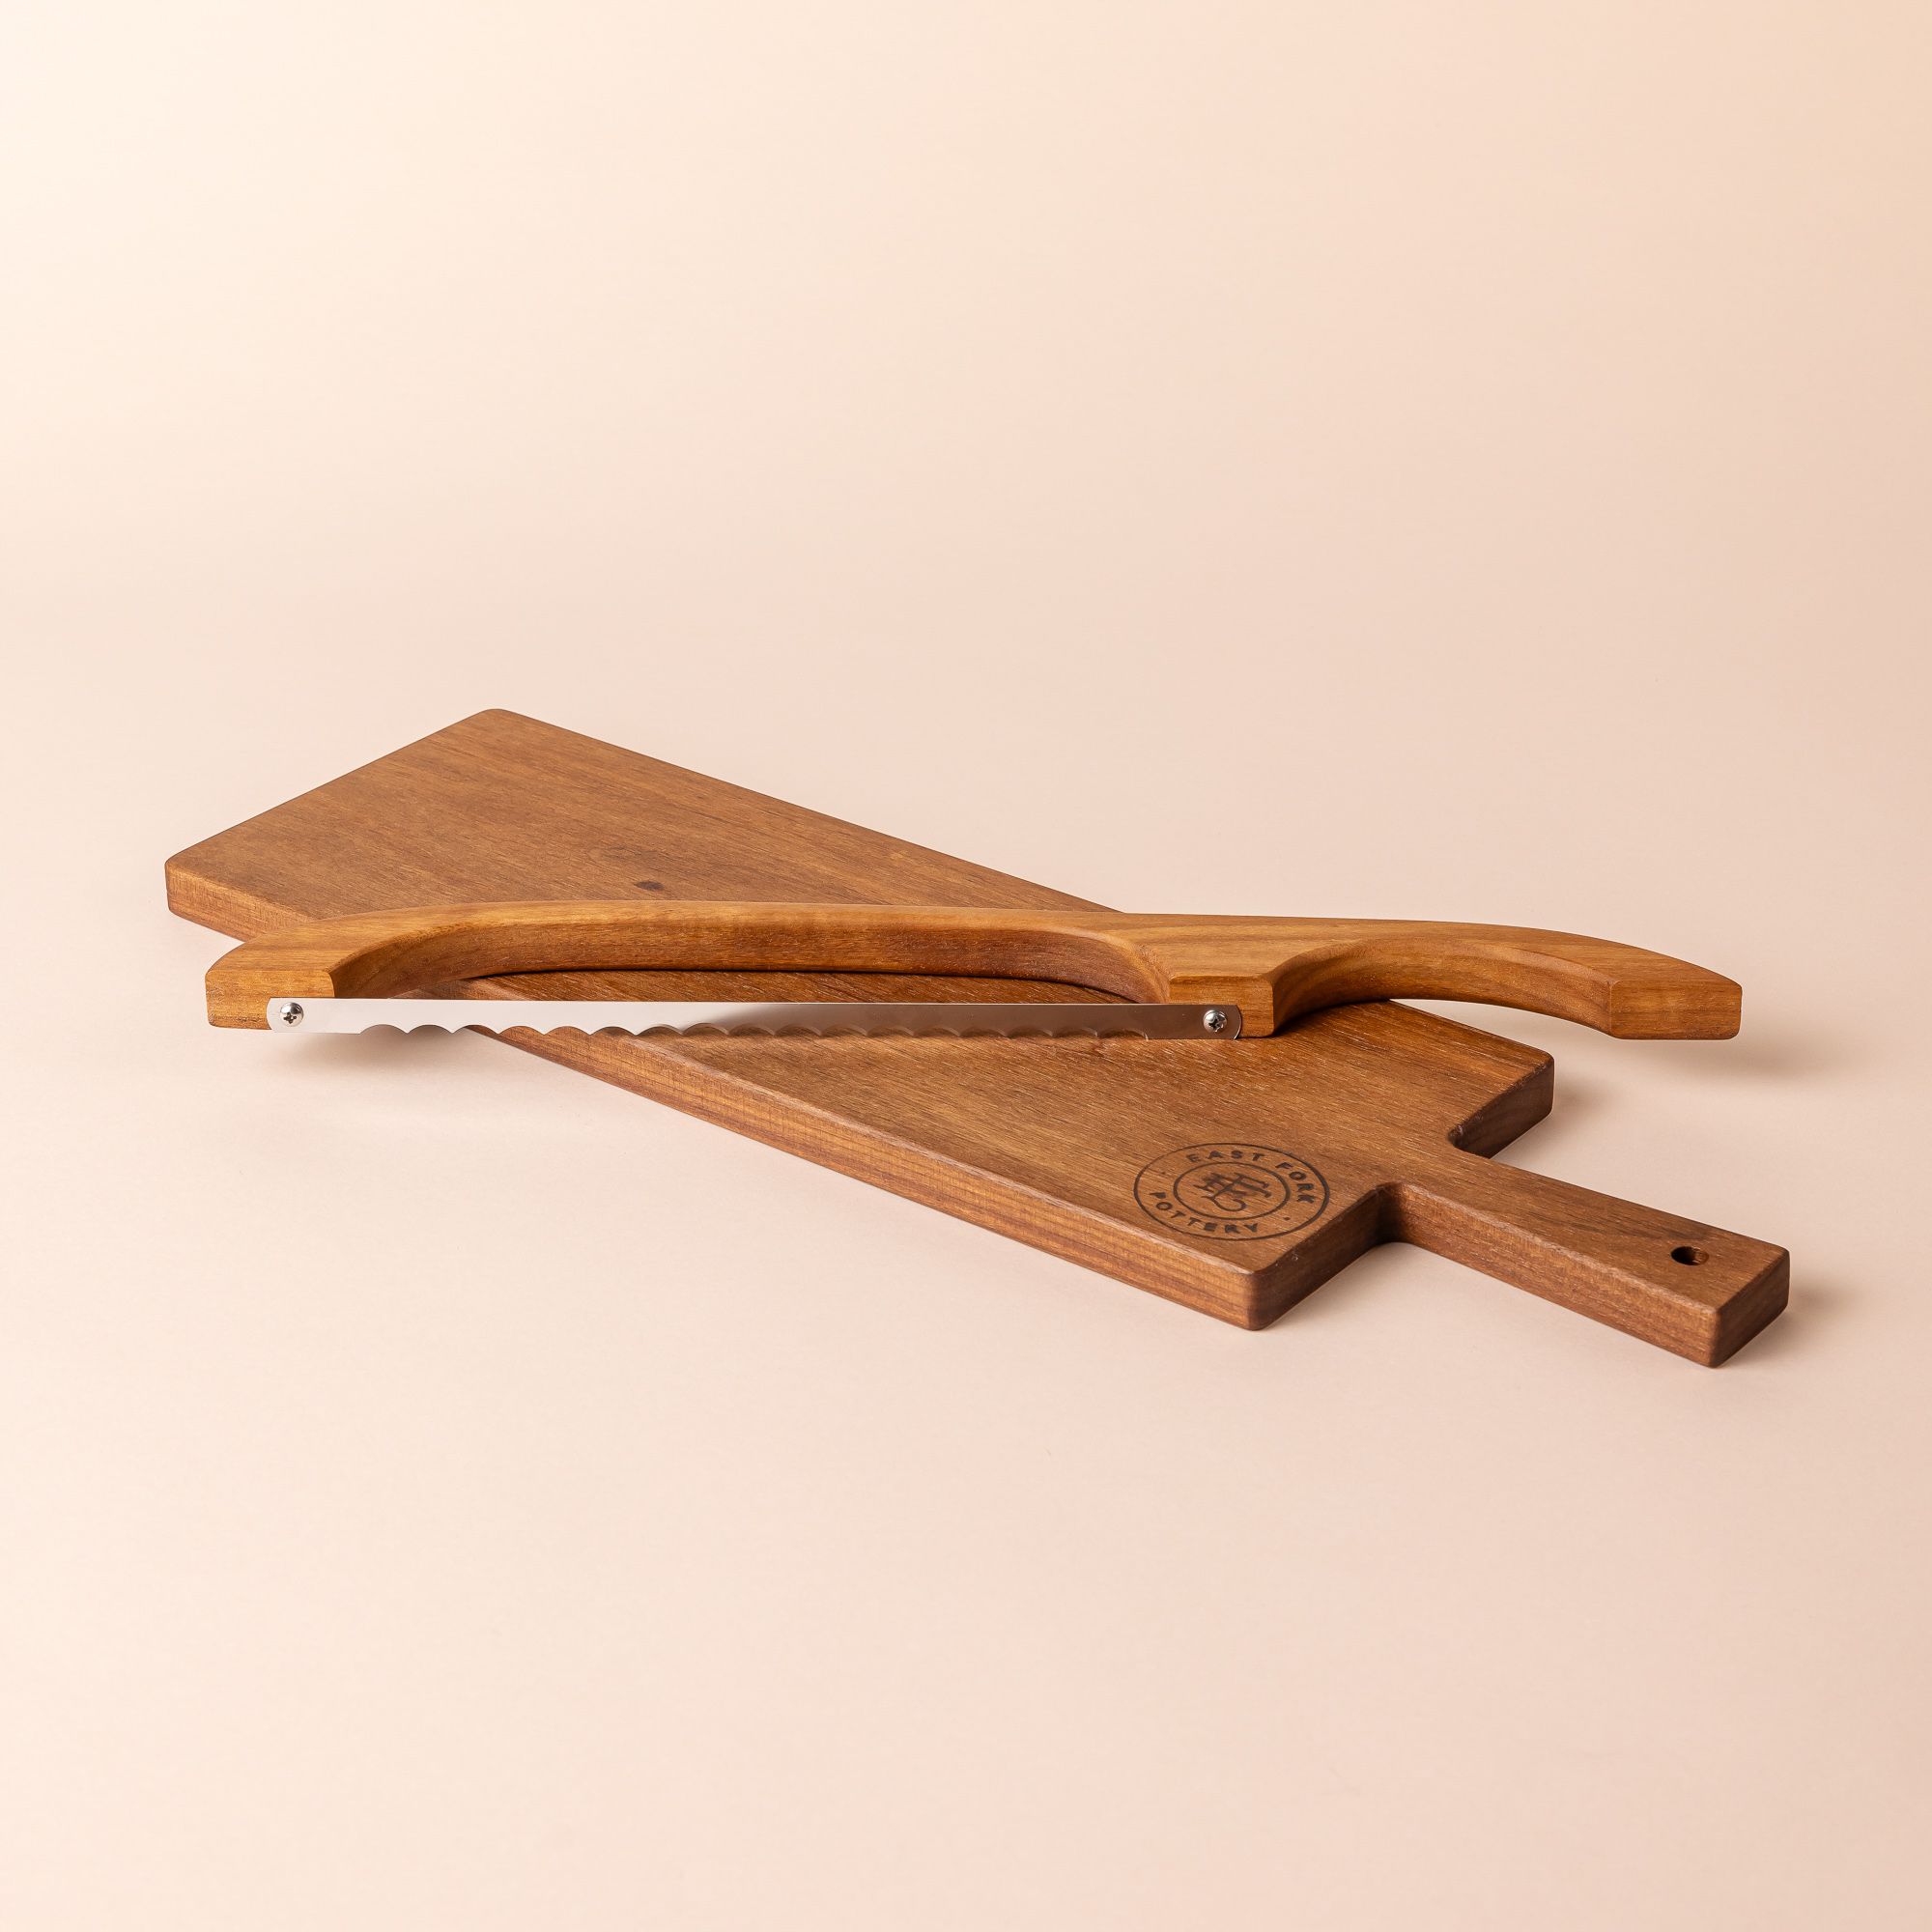 A wood rectangle bread board with an "East Fork Pottery" stamp on the corner and a handle. A matching wood bread bow sits on top of it.